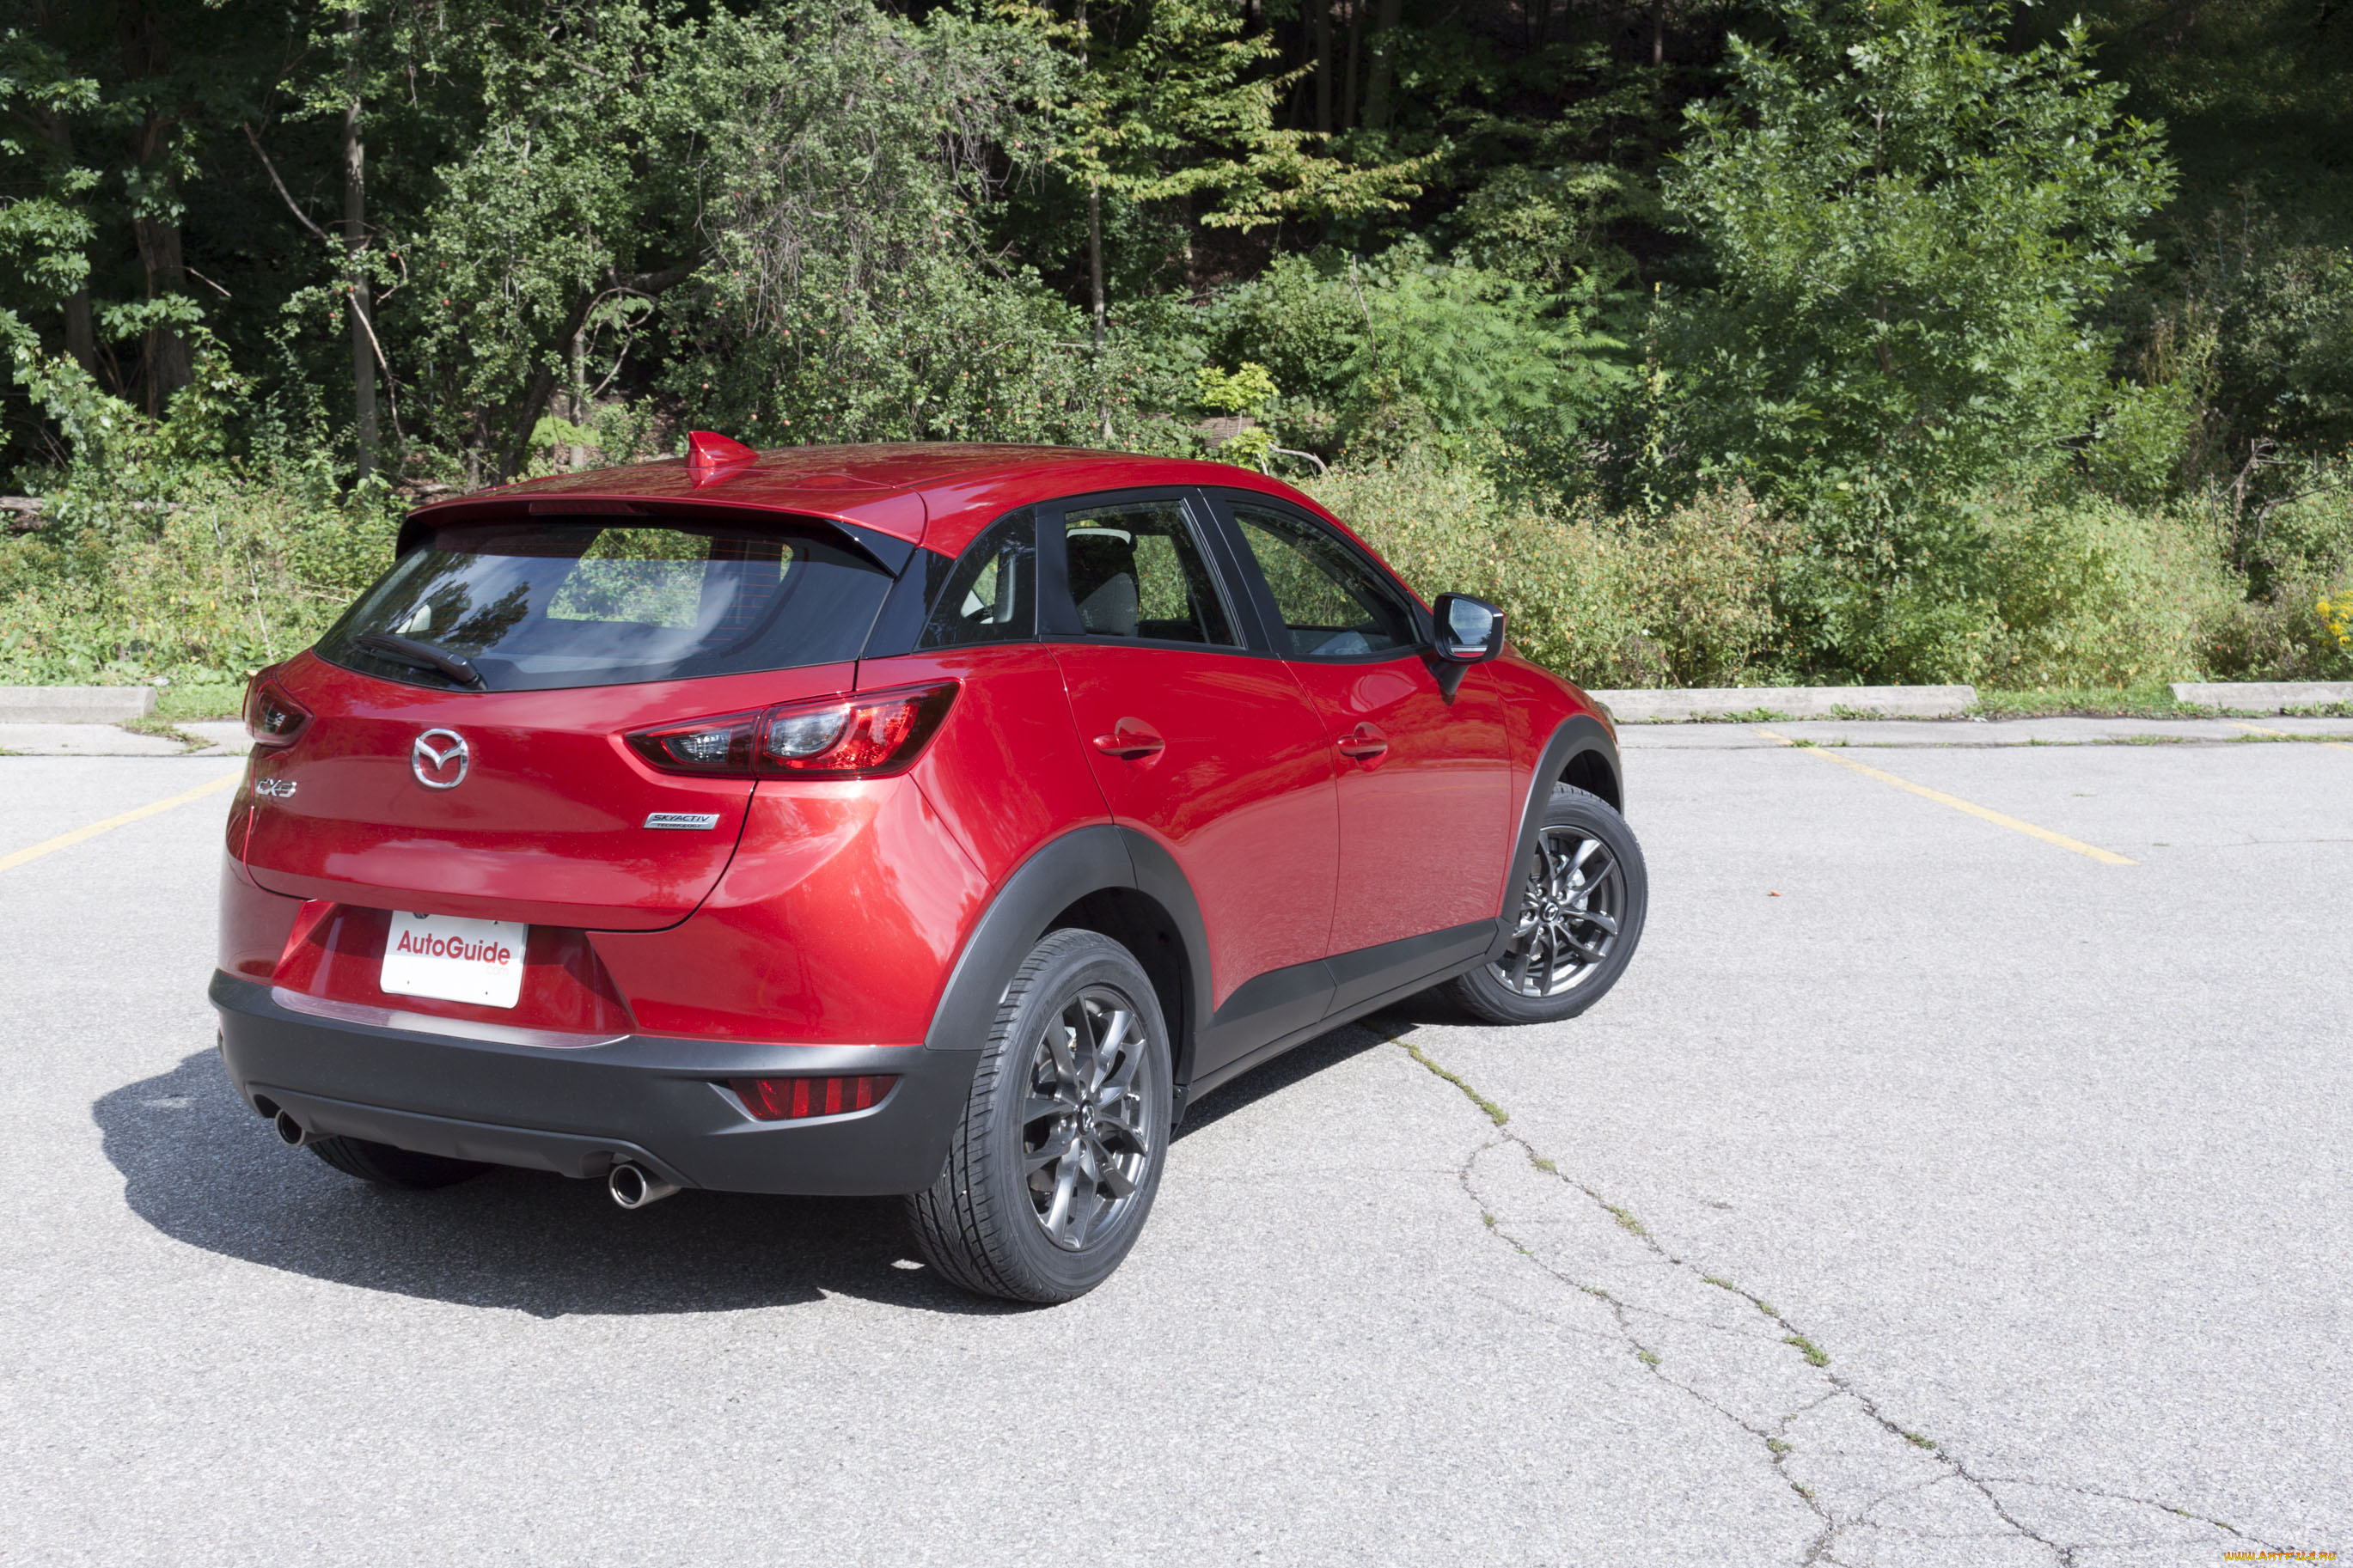 mazda, cx-3, review, subcompact, crossover, 2018, автомобили, mazda, subcompact, 2018, review, cx-3, crossover, red